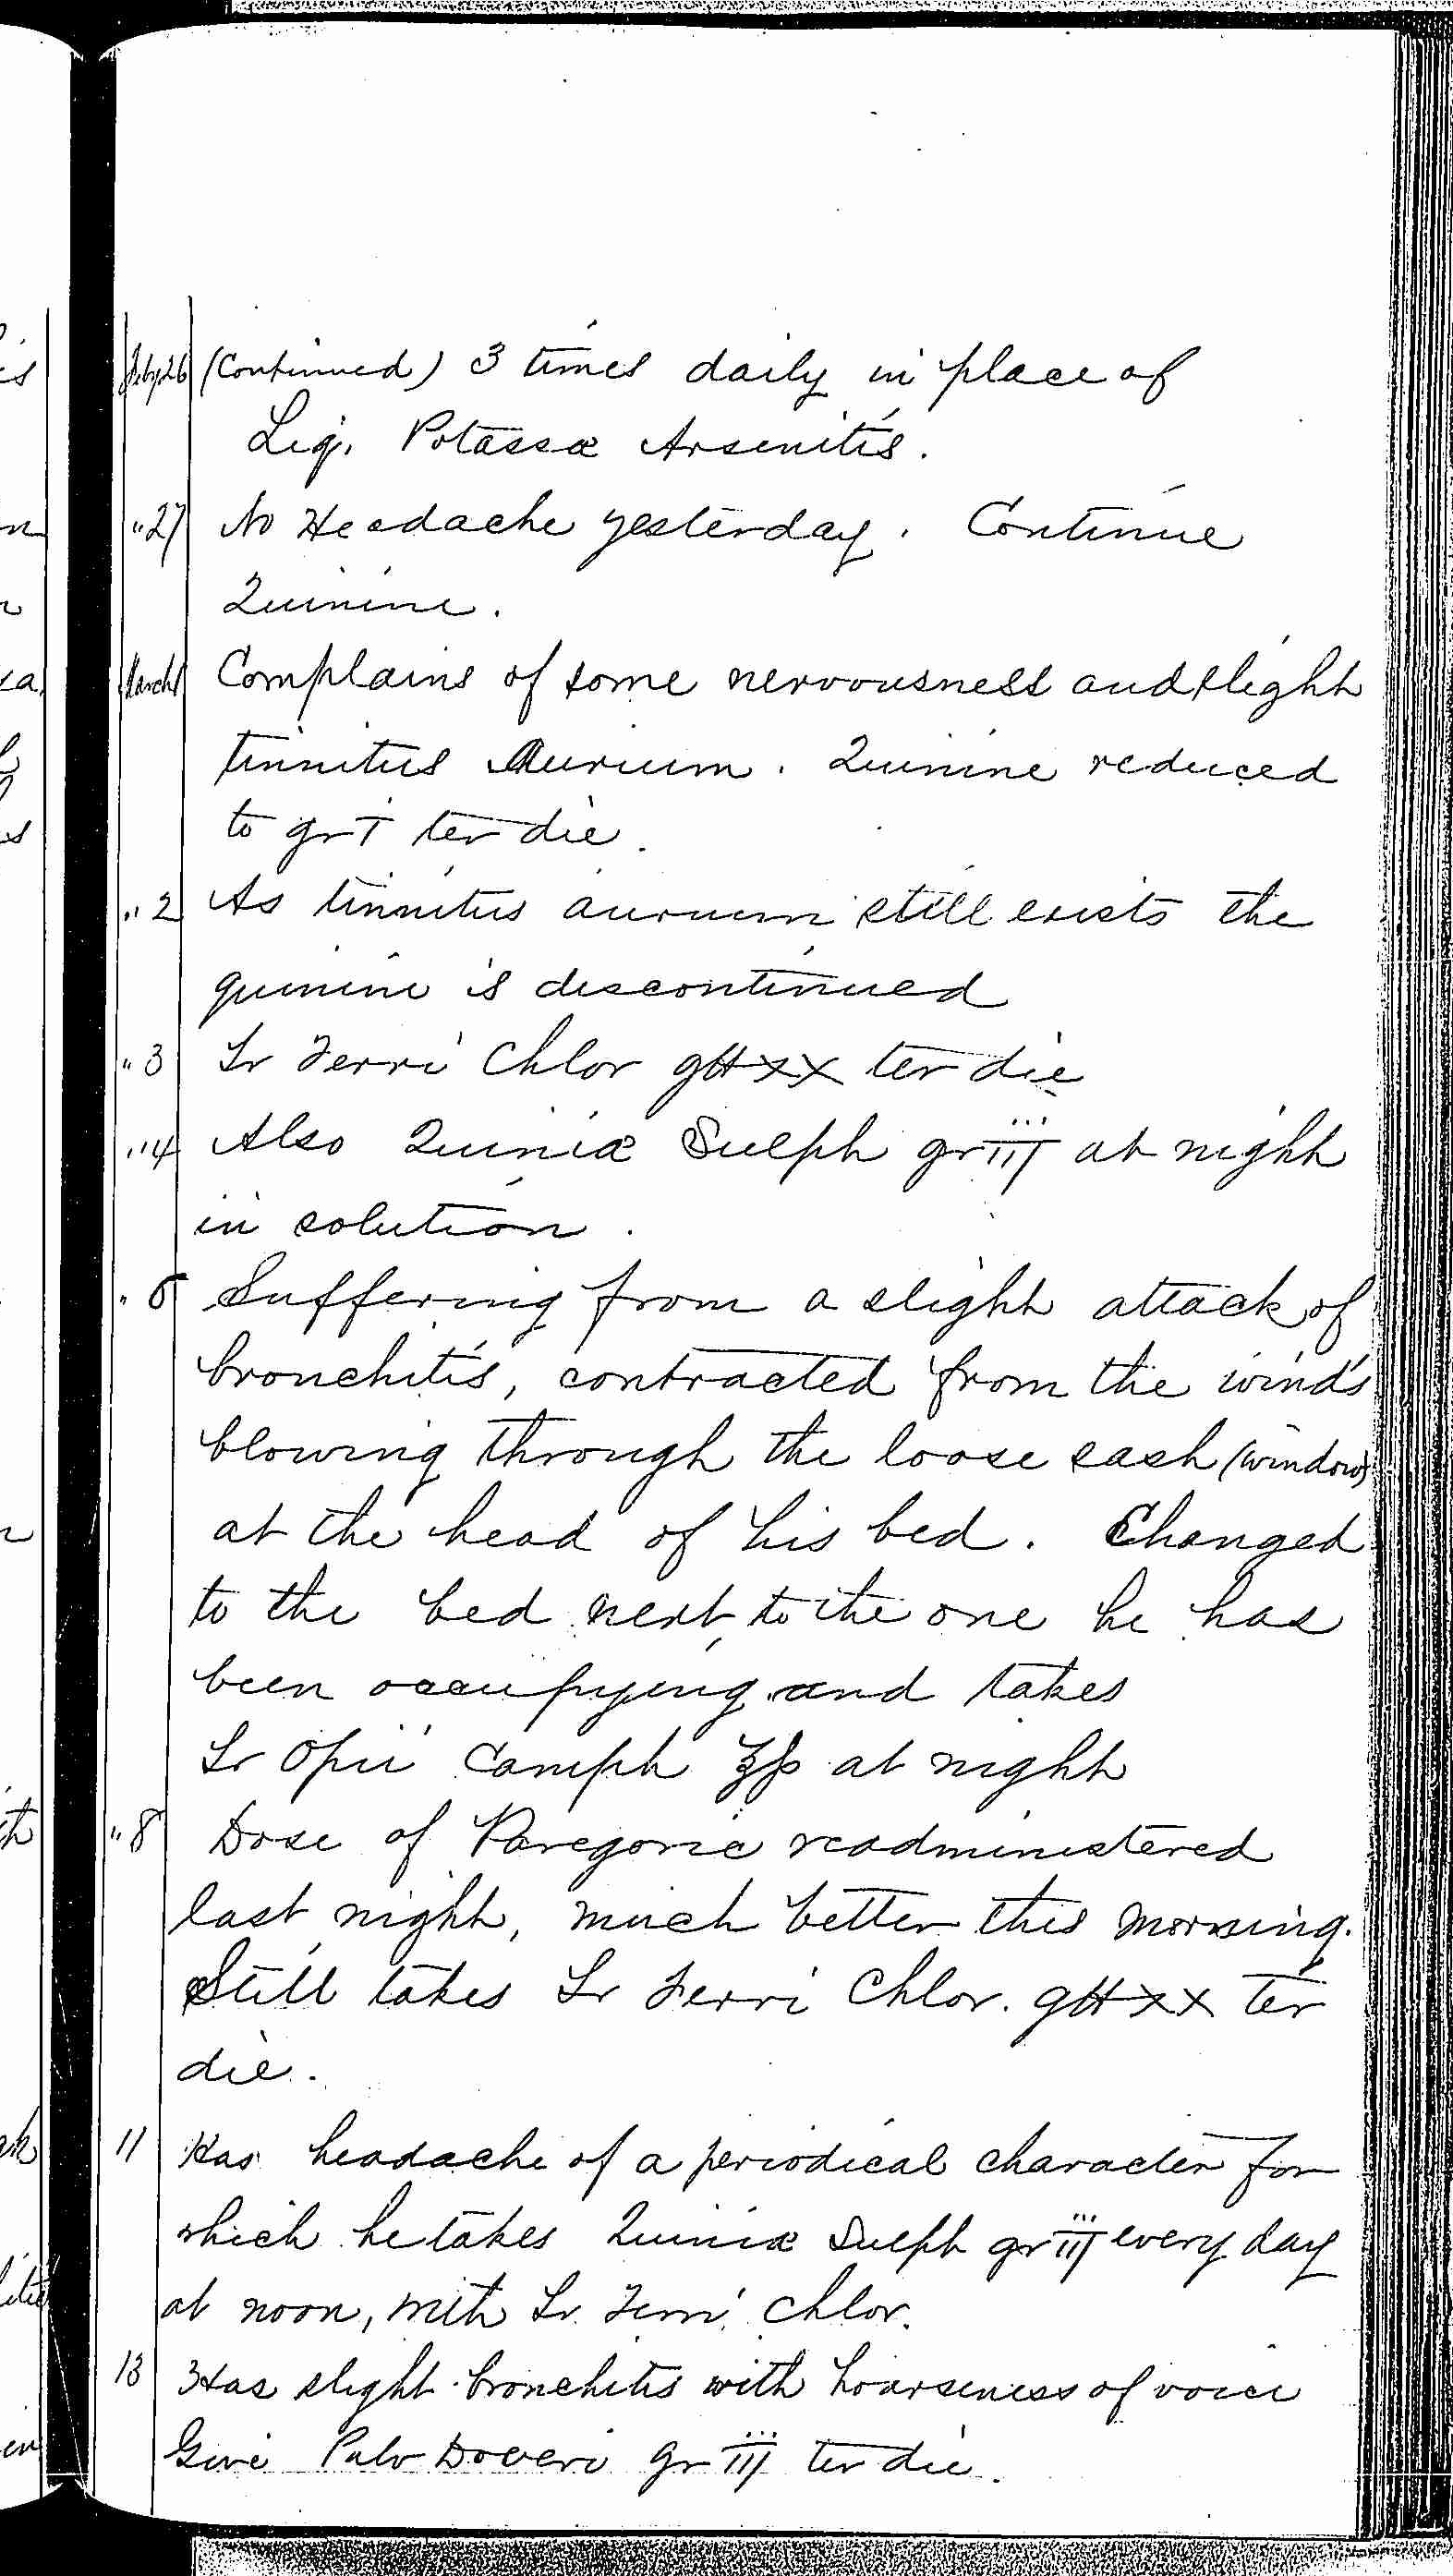 Entry for Frederick Hammett (page 3 of 5) in the log Hospital Tickets and Case Papers - Naval Hospital - Washington, D.C. - 1868-69